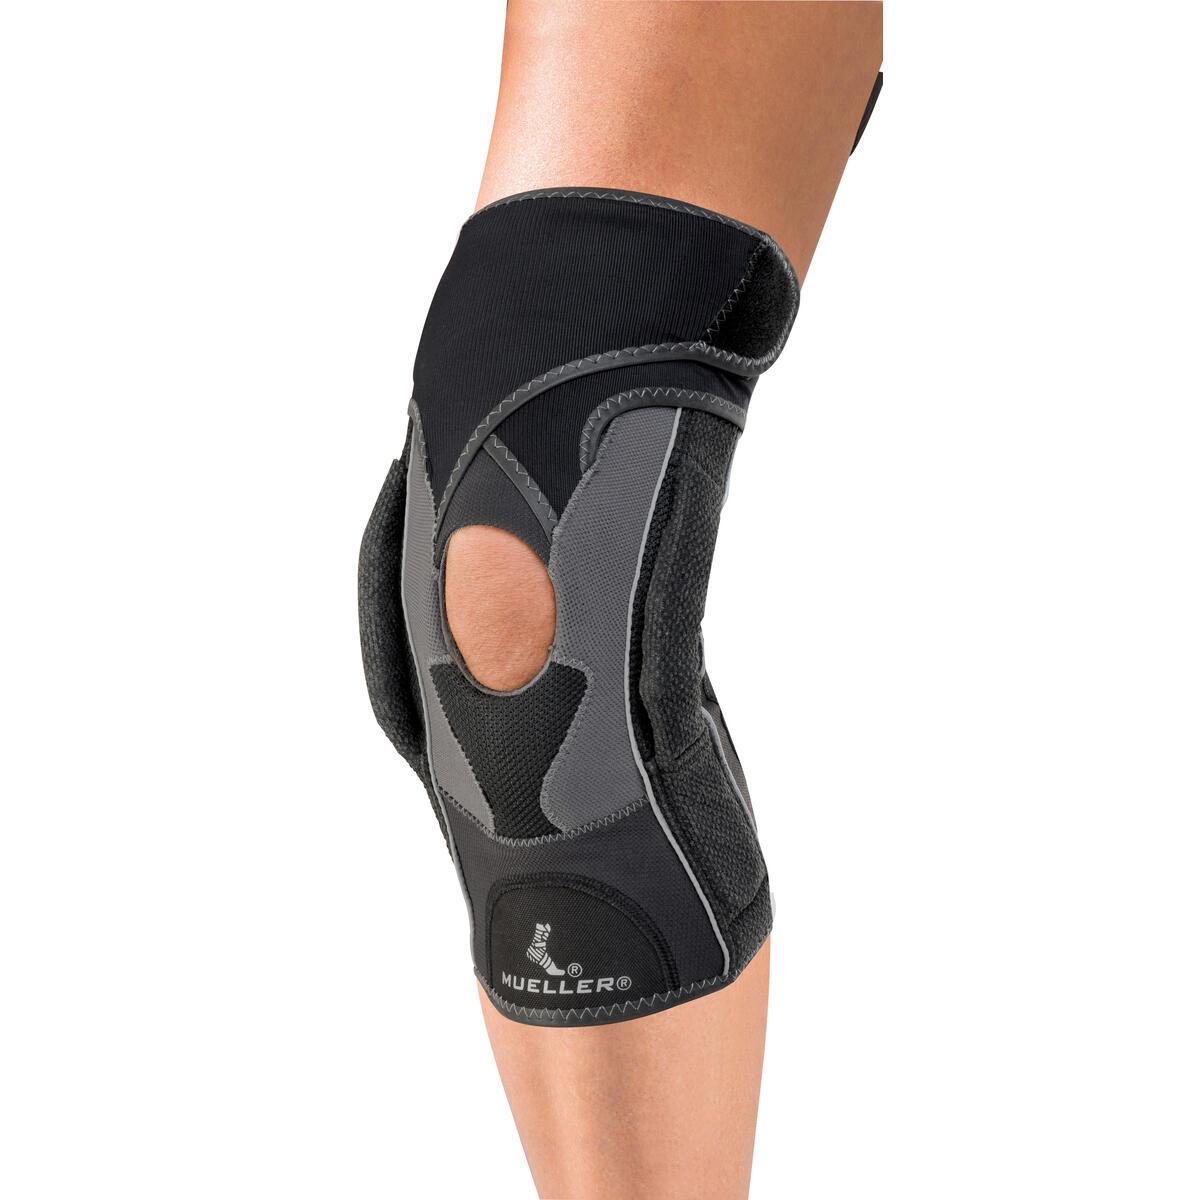 Mueller HG80 Hinged Knee Brace Compression Support for Injury (S) 2/2